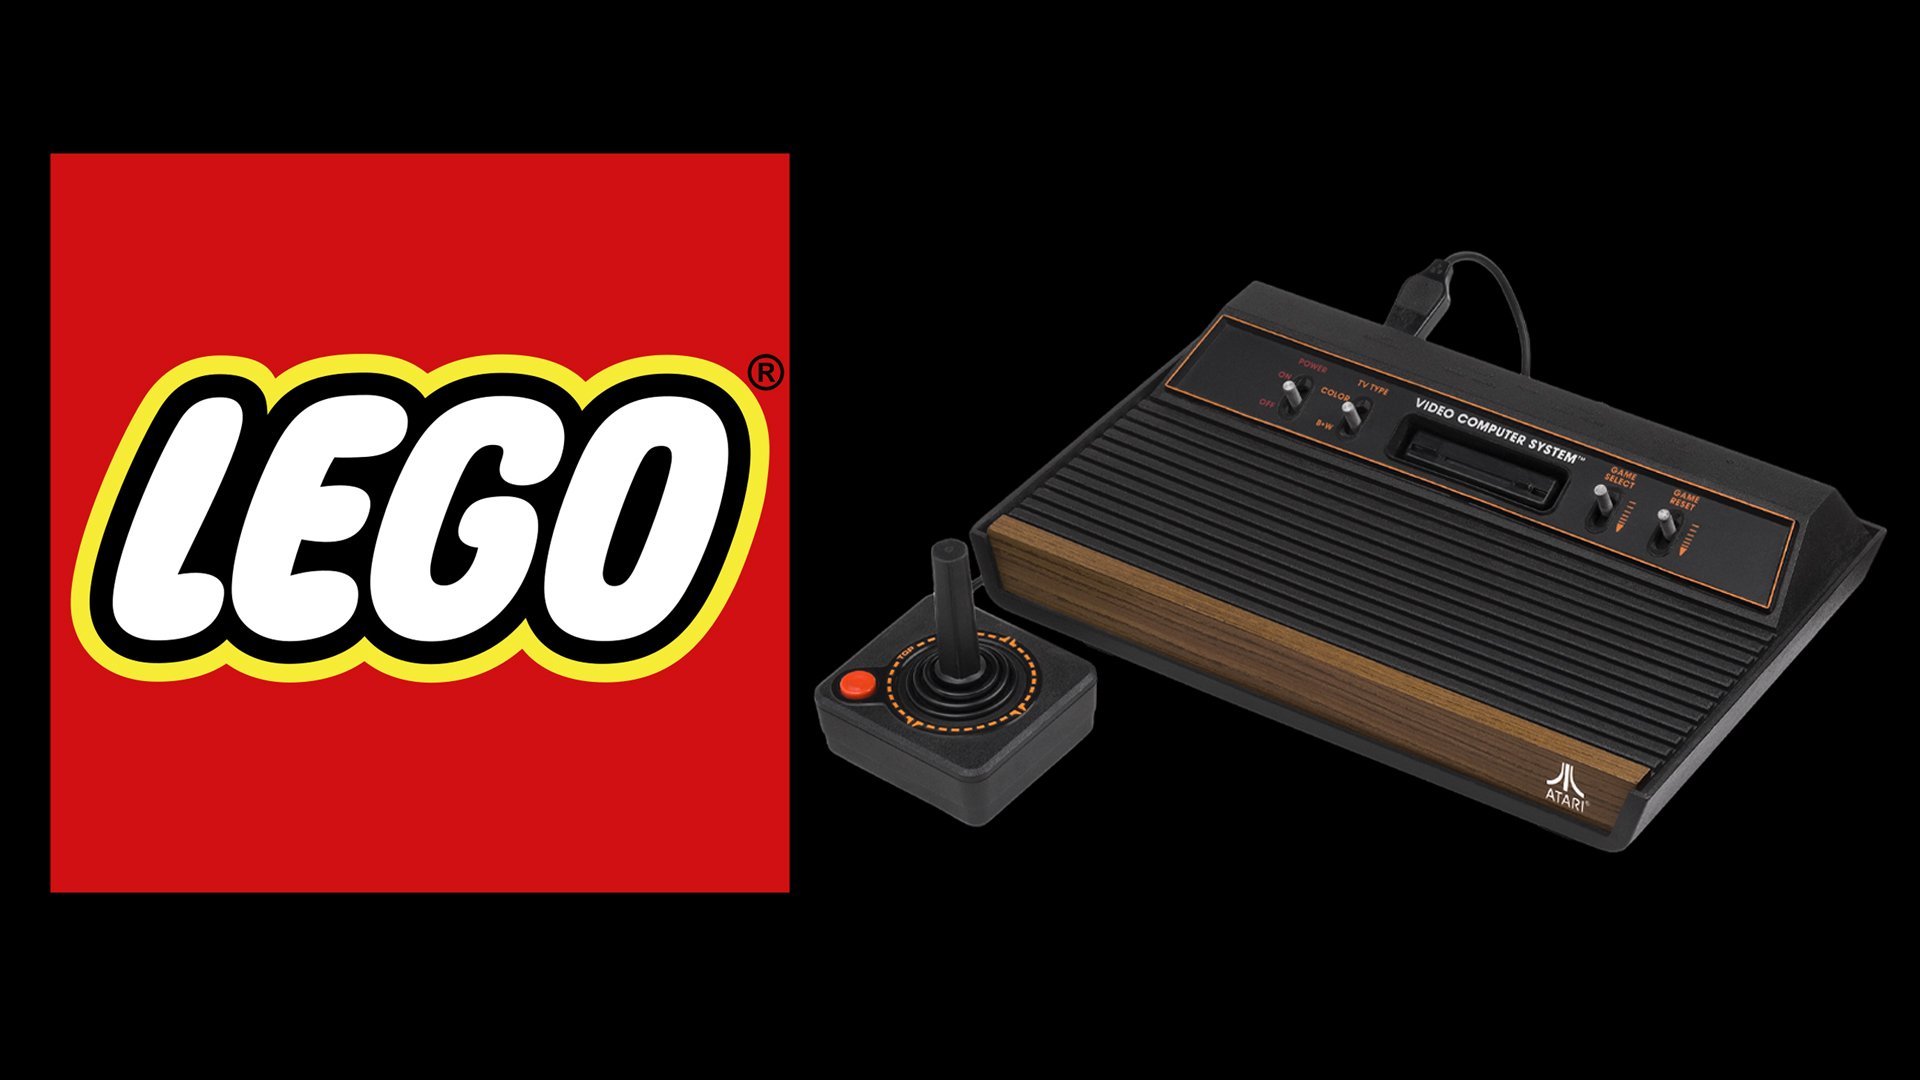 Atari 2600 Plus review: Party like it's 1977